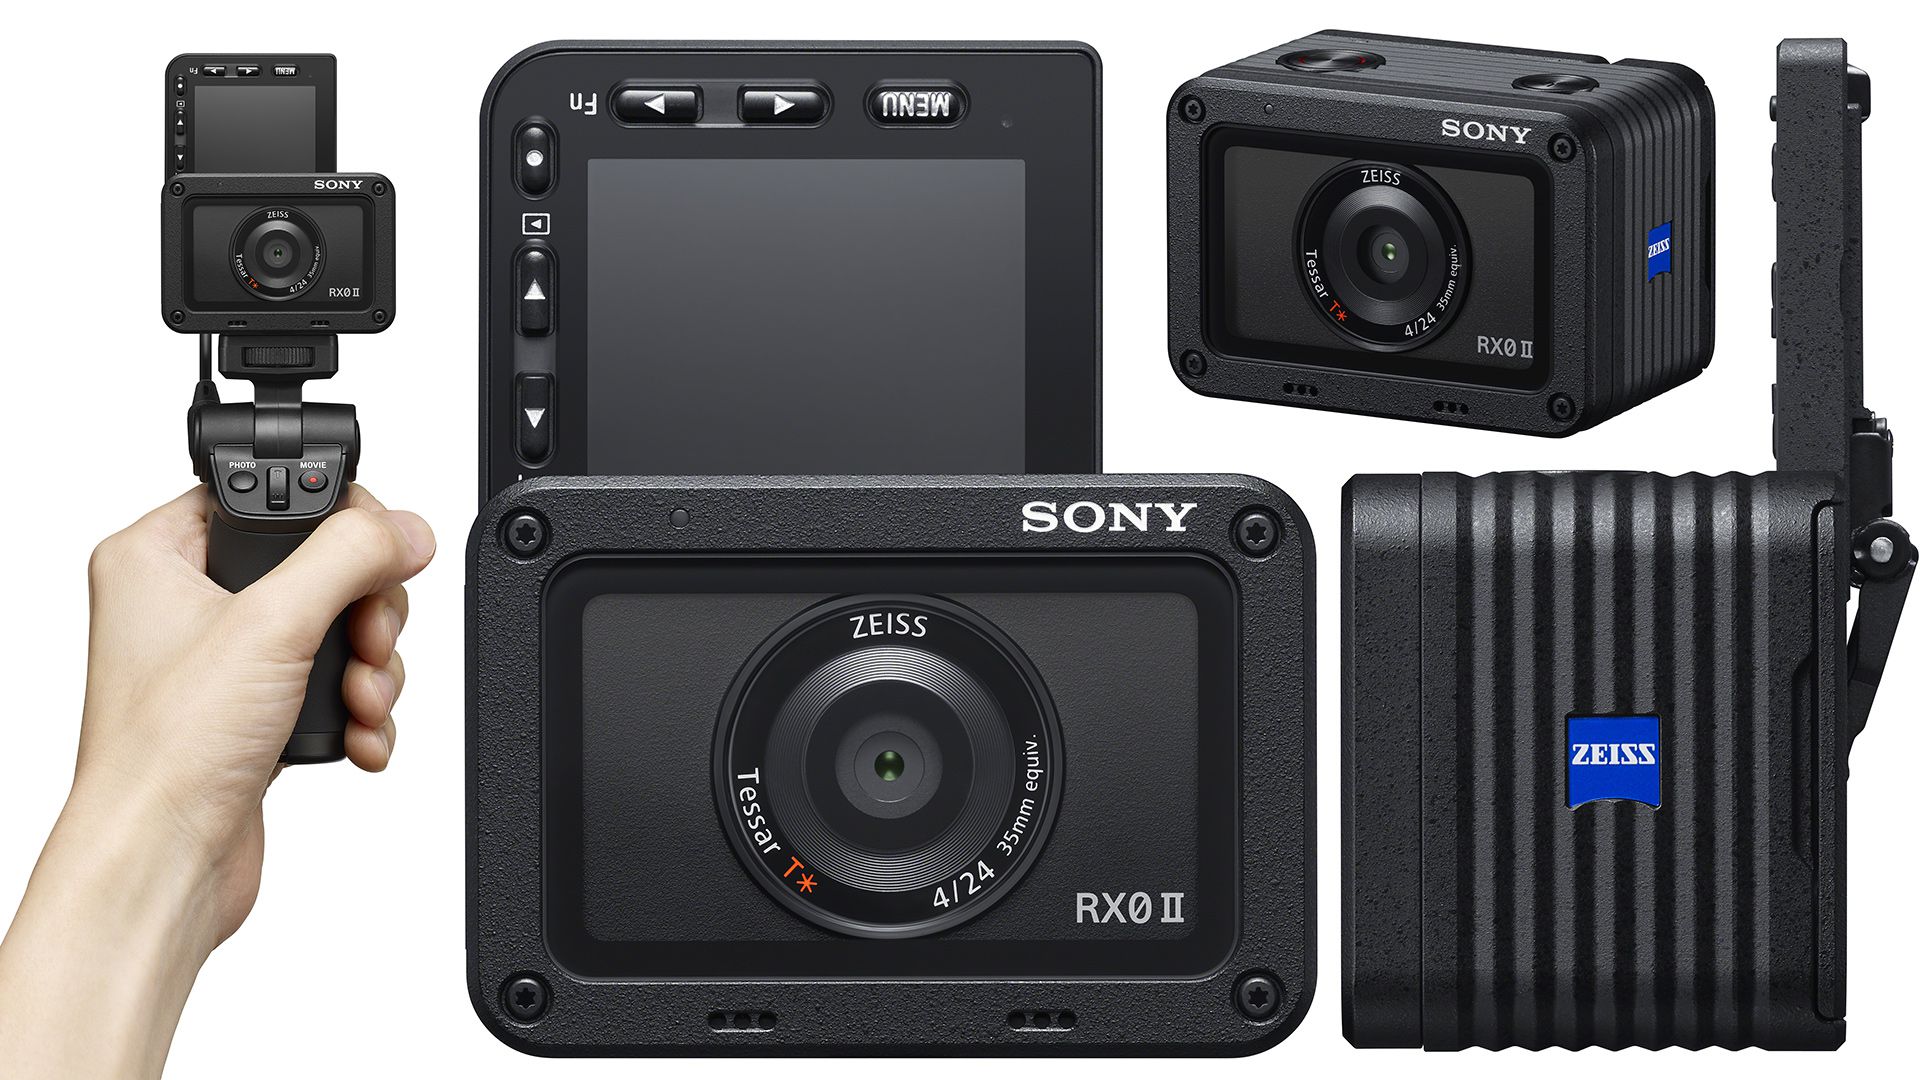 The world’s smallest and lightest premium compact camera, Sony RX0 II